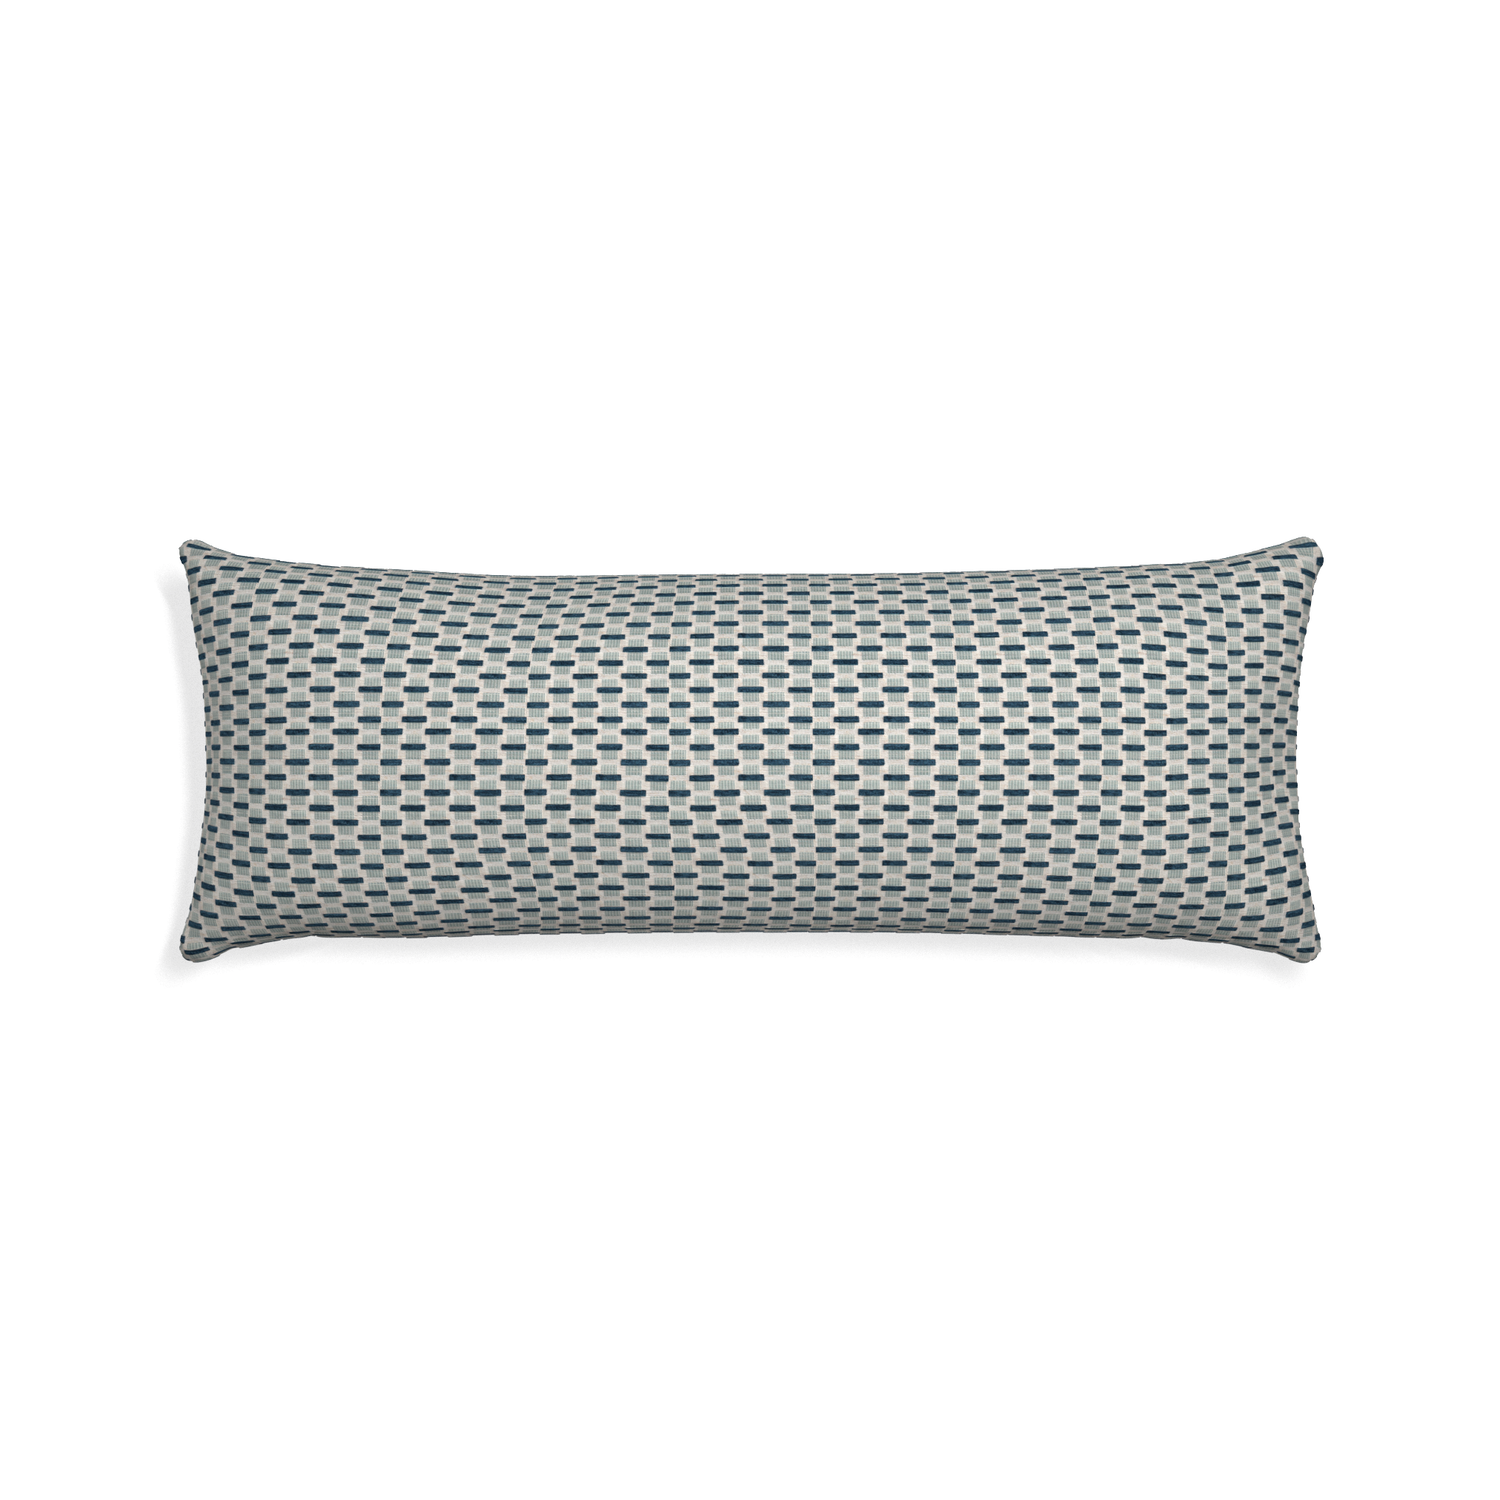 Xl-lumbar willow amalfi custom blue geometric chenillepillow with none on white background